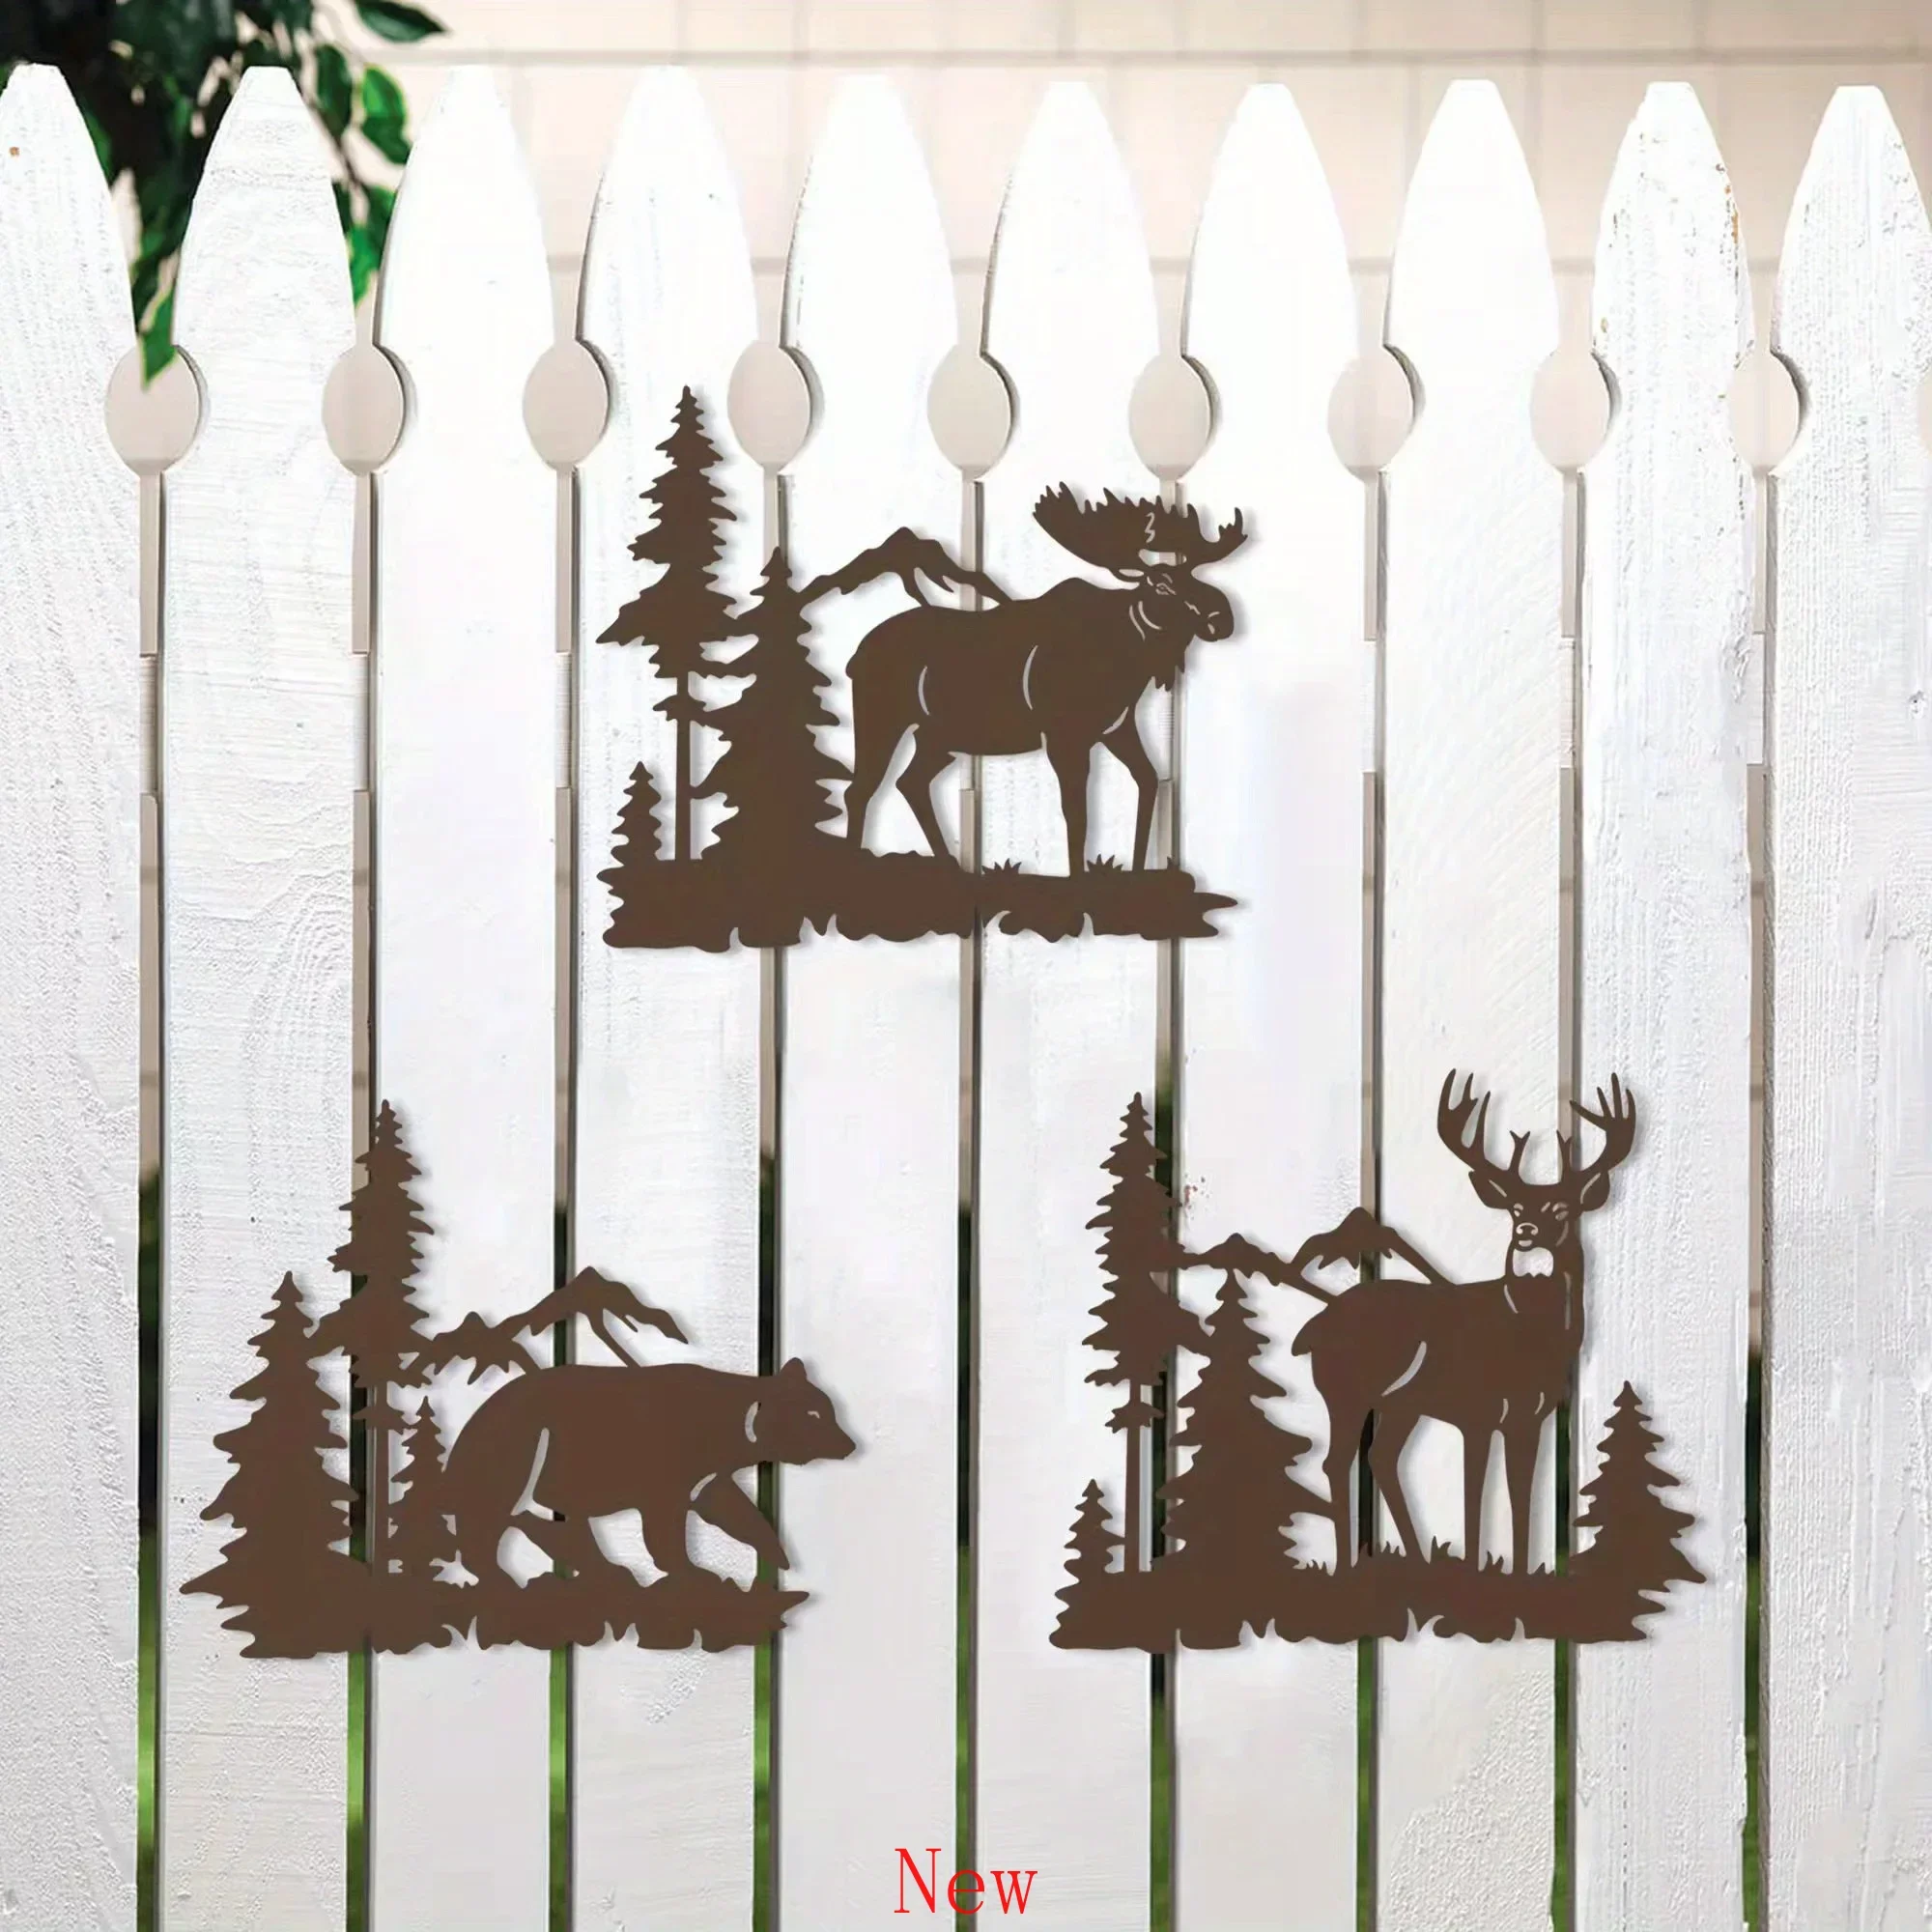 

Metal Home Art Decor Deer Bear Moose in The Forest Pine Tree Set of 3 Rustic Concise Decoration Wall Hanging Lodge Cabin Décor w